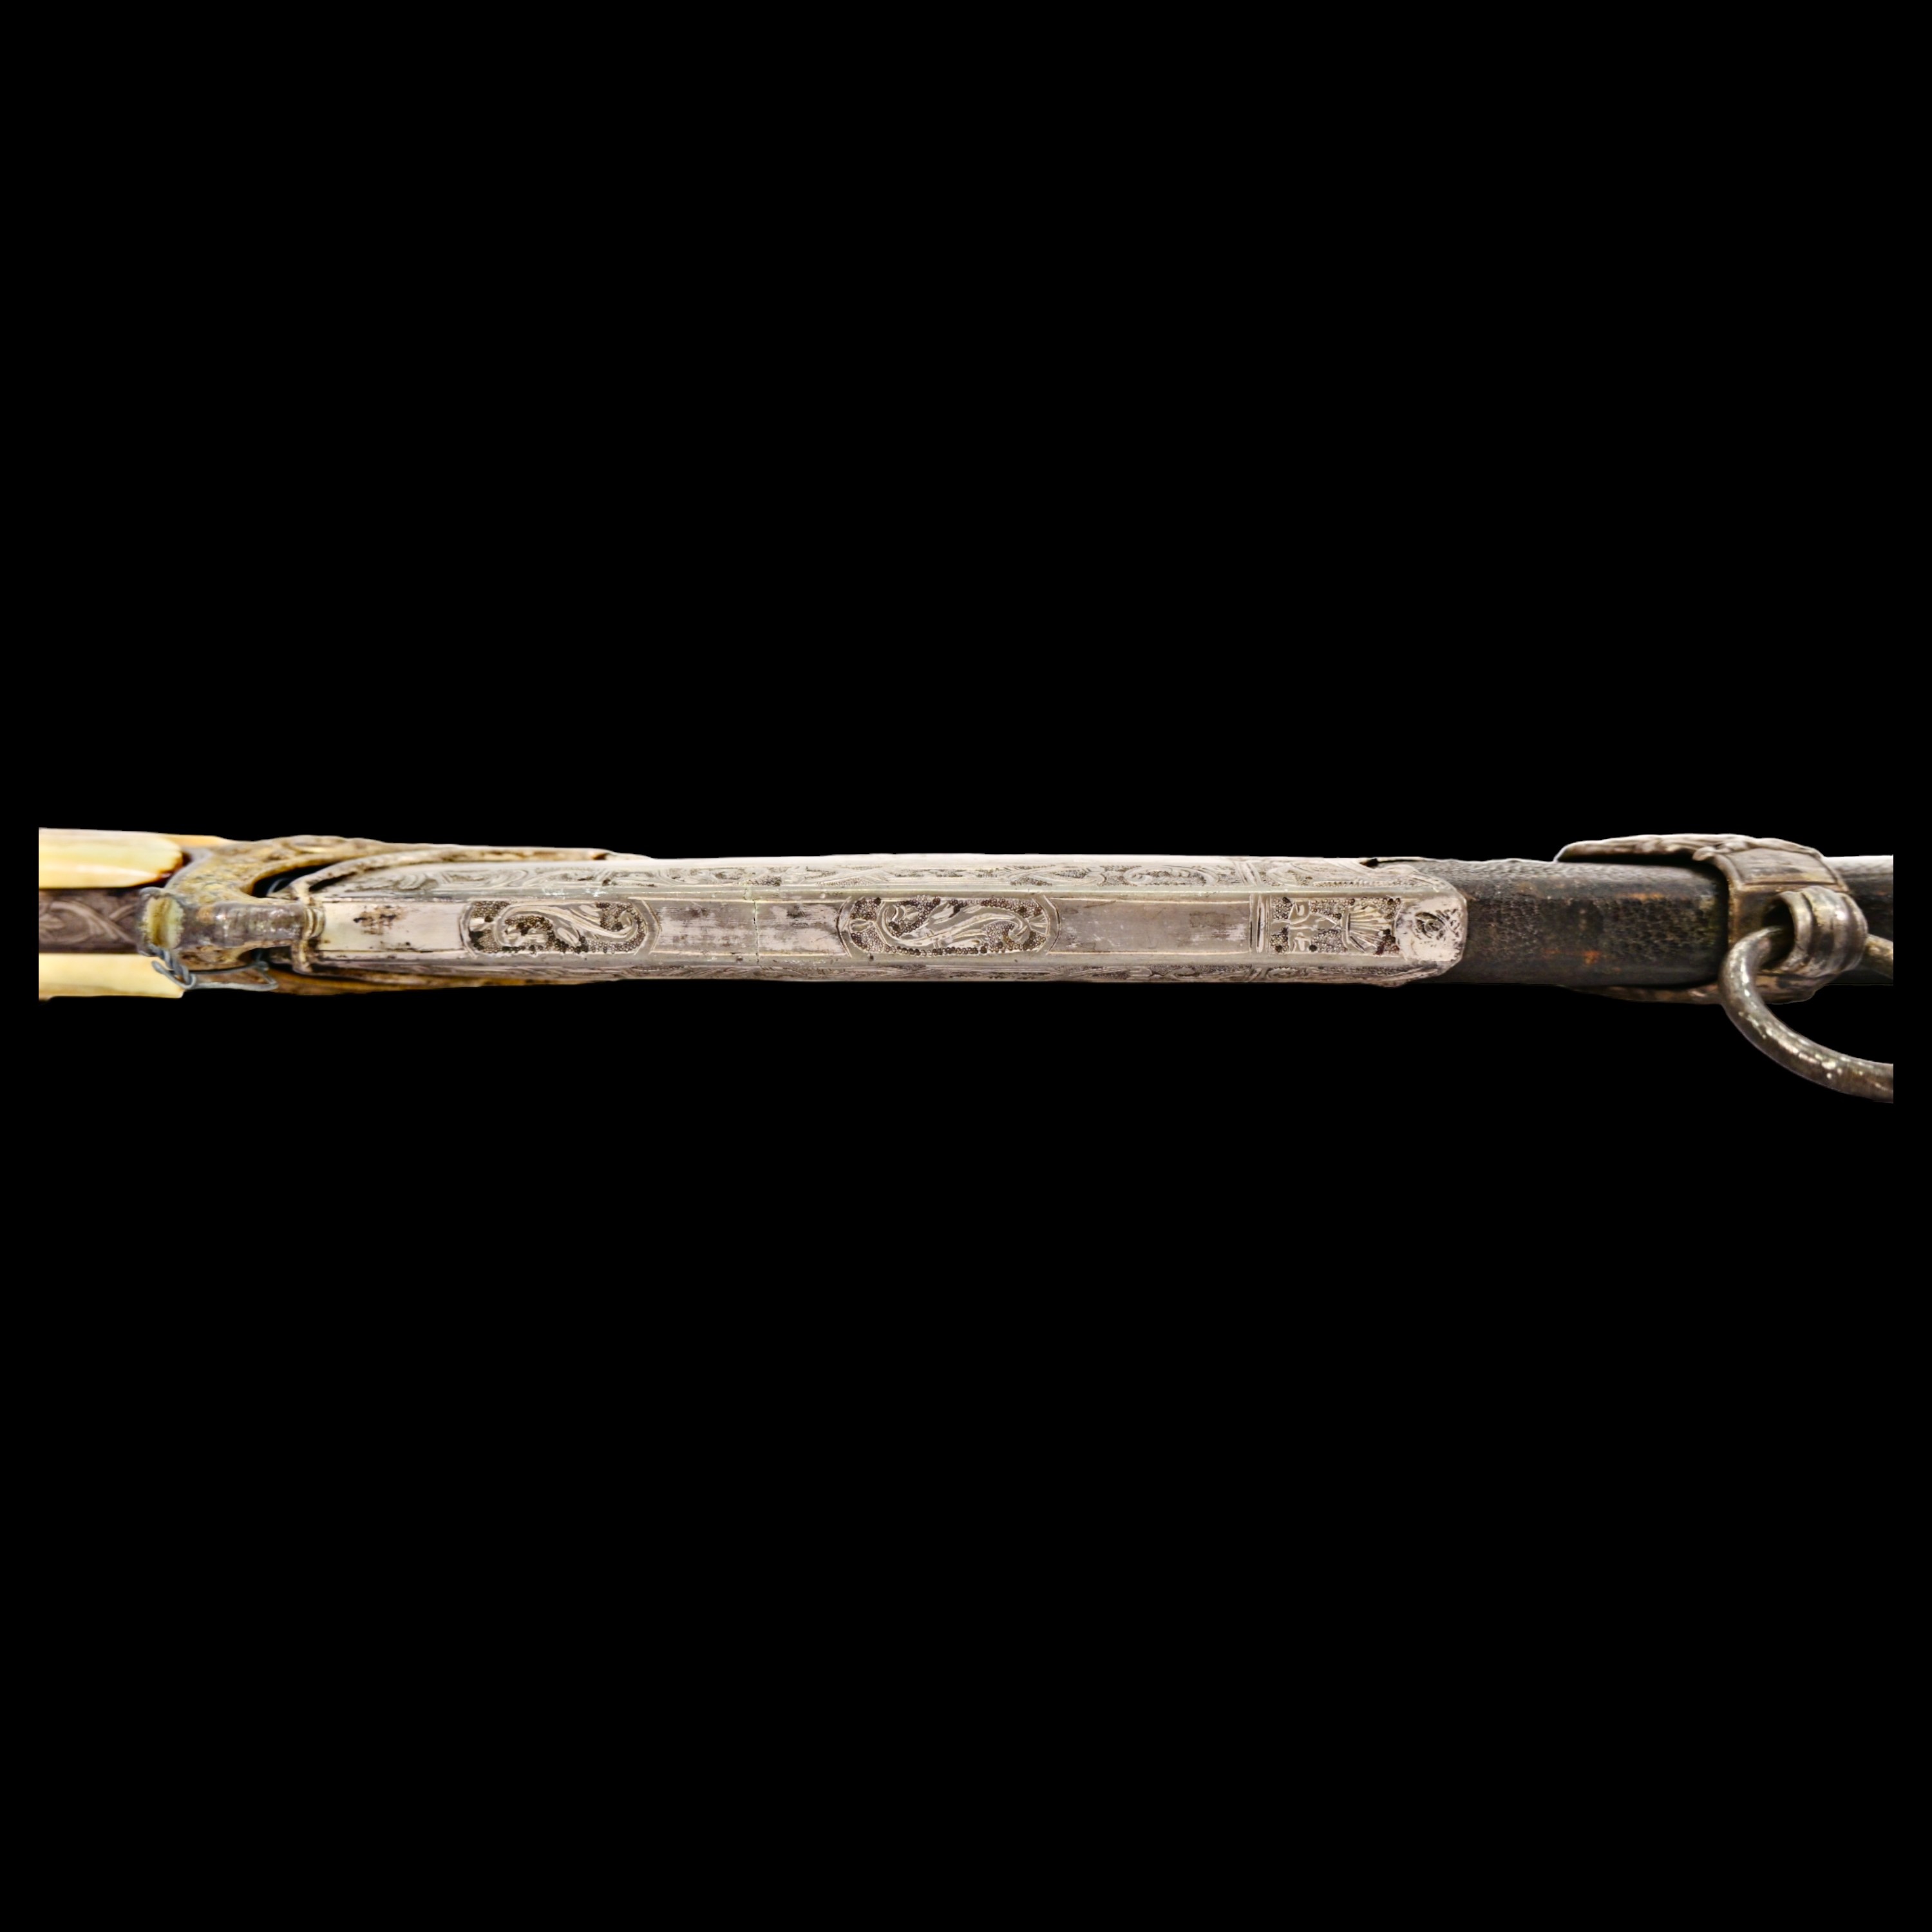 Rare Ottoman saber KARABELA, wootz blade, silver with the tugra of Sultan Ahmed III, early 18th C. - Image 11 of 27